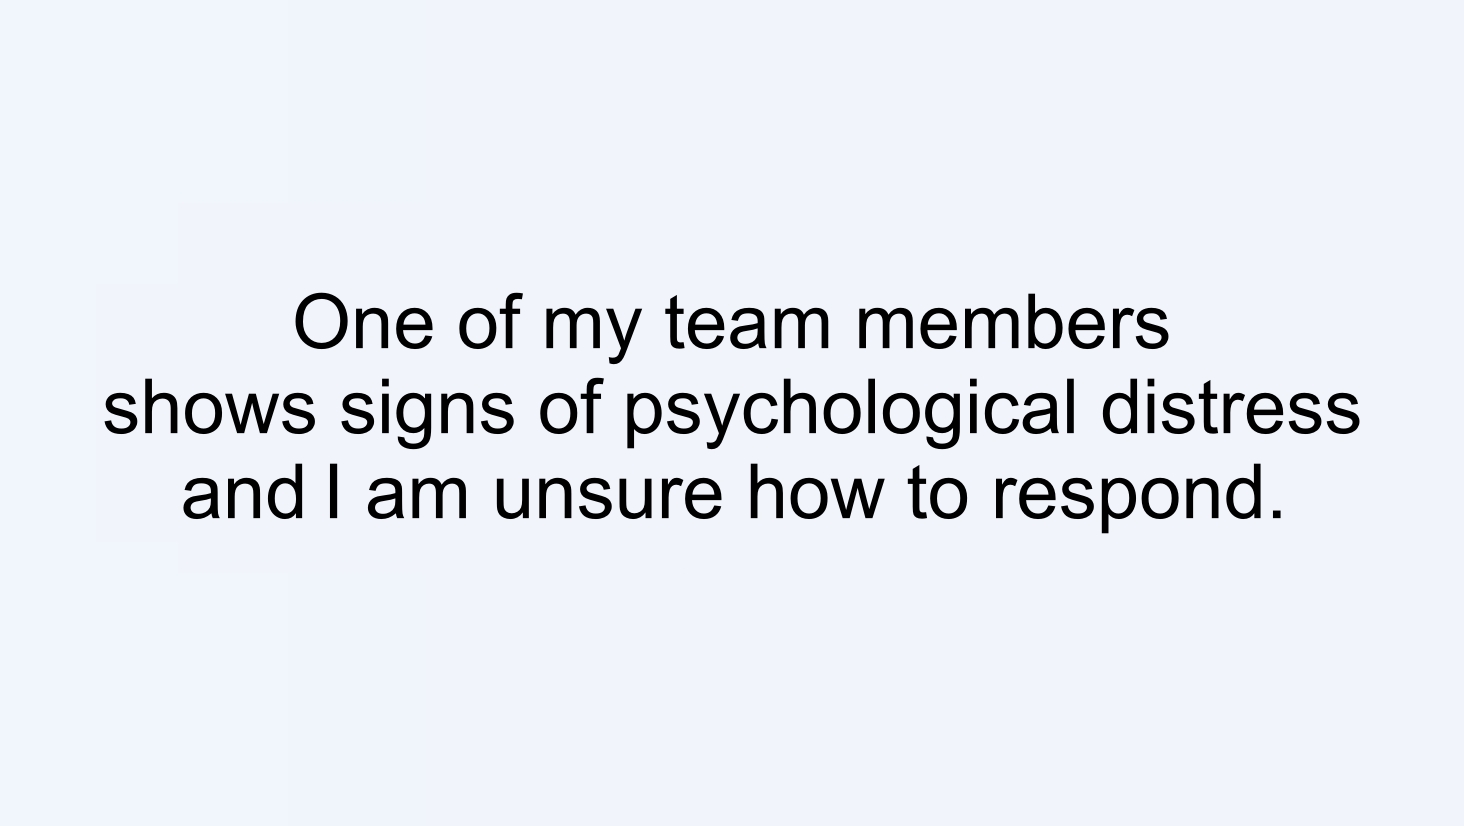 One of my team members shows signs of psychological distress and I am unsure how to respond.